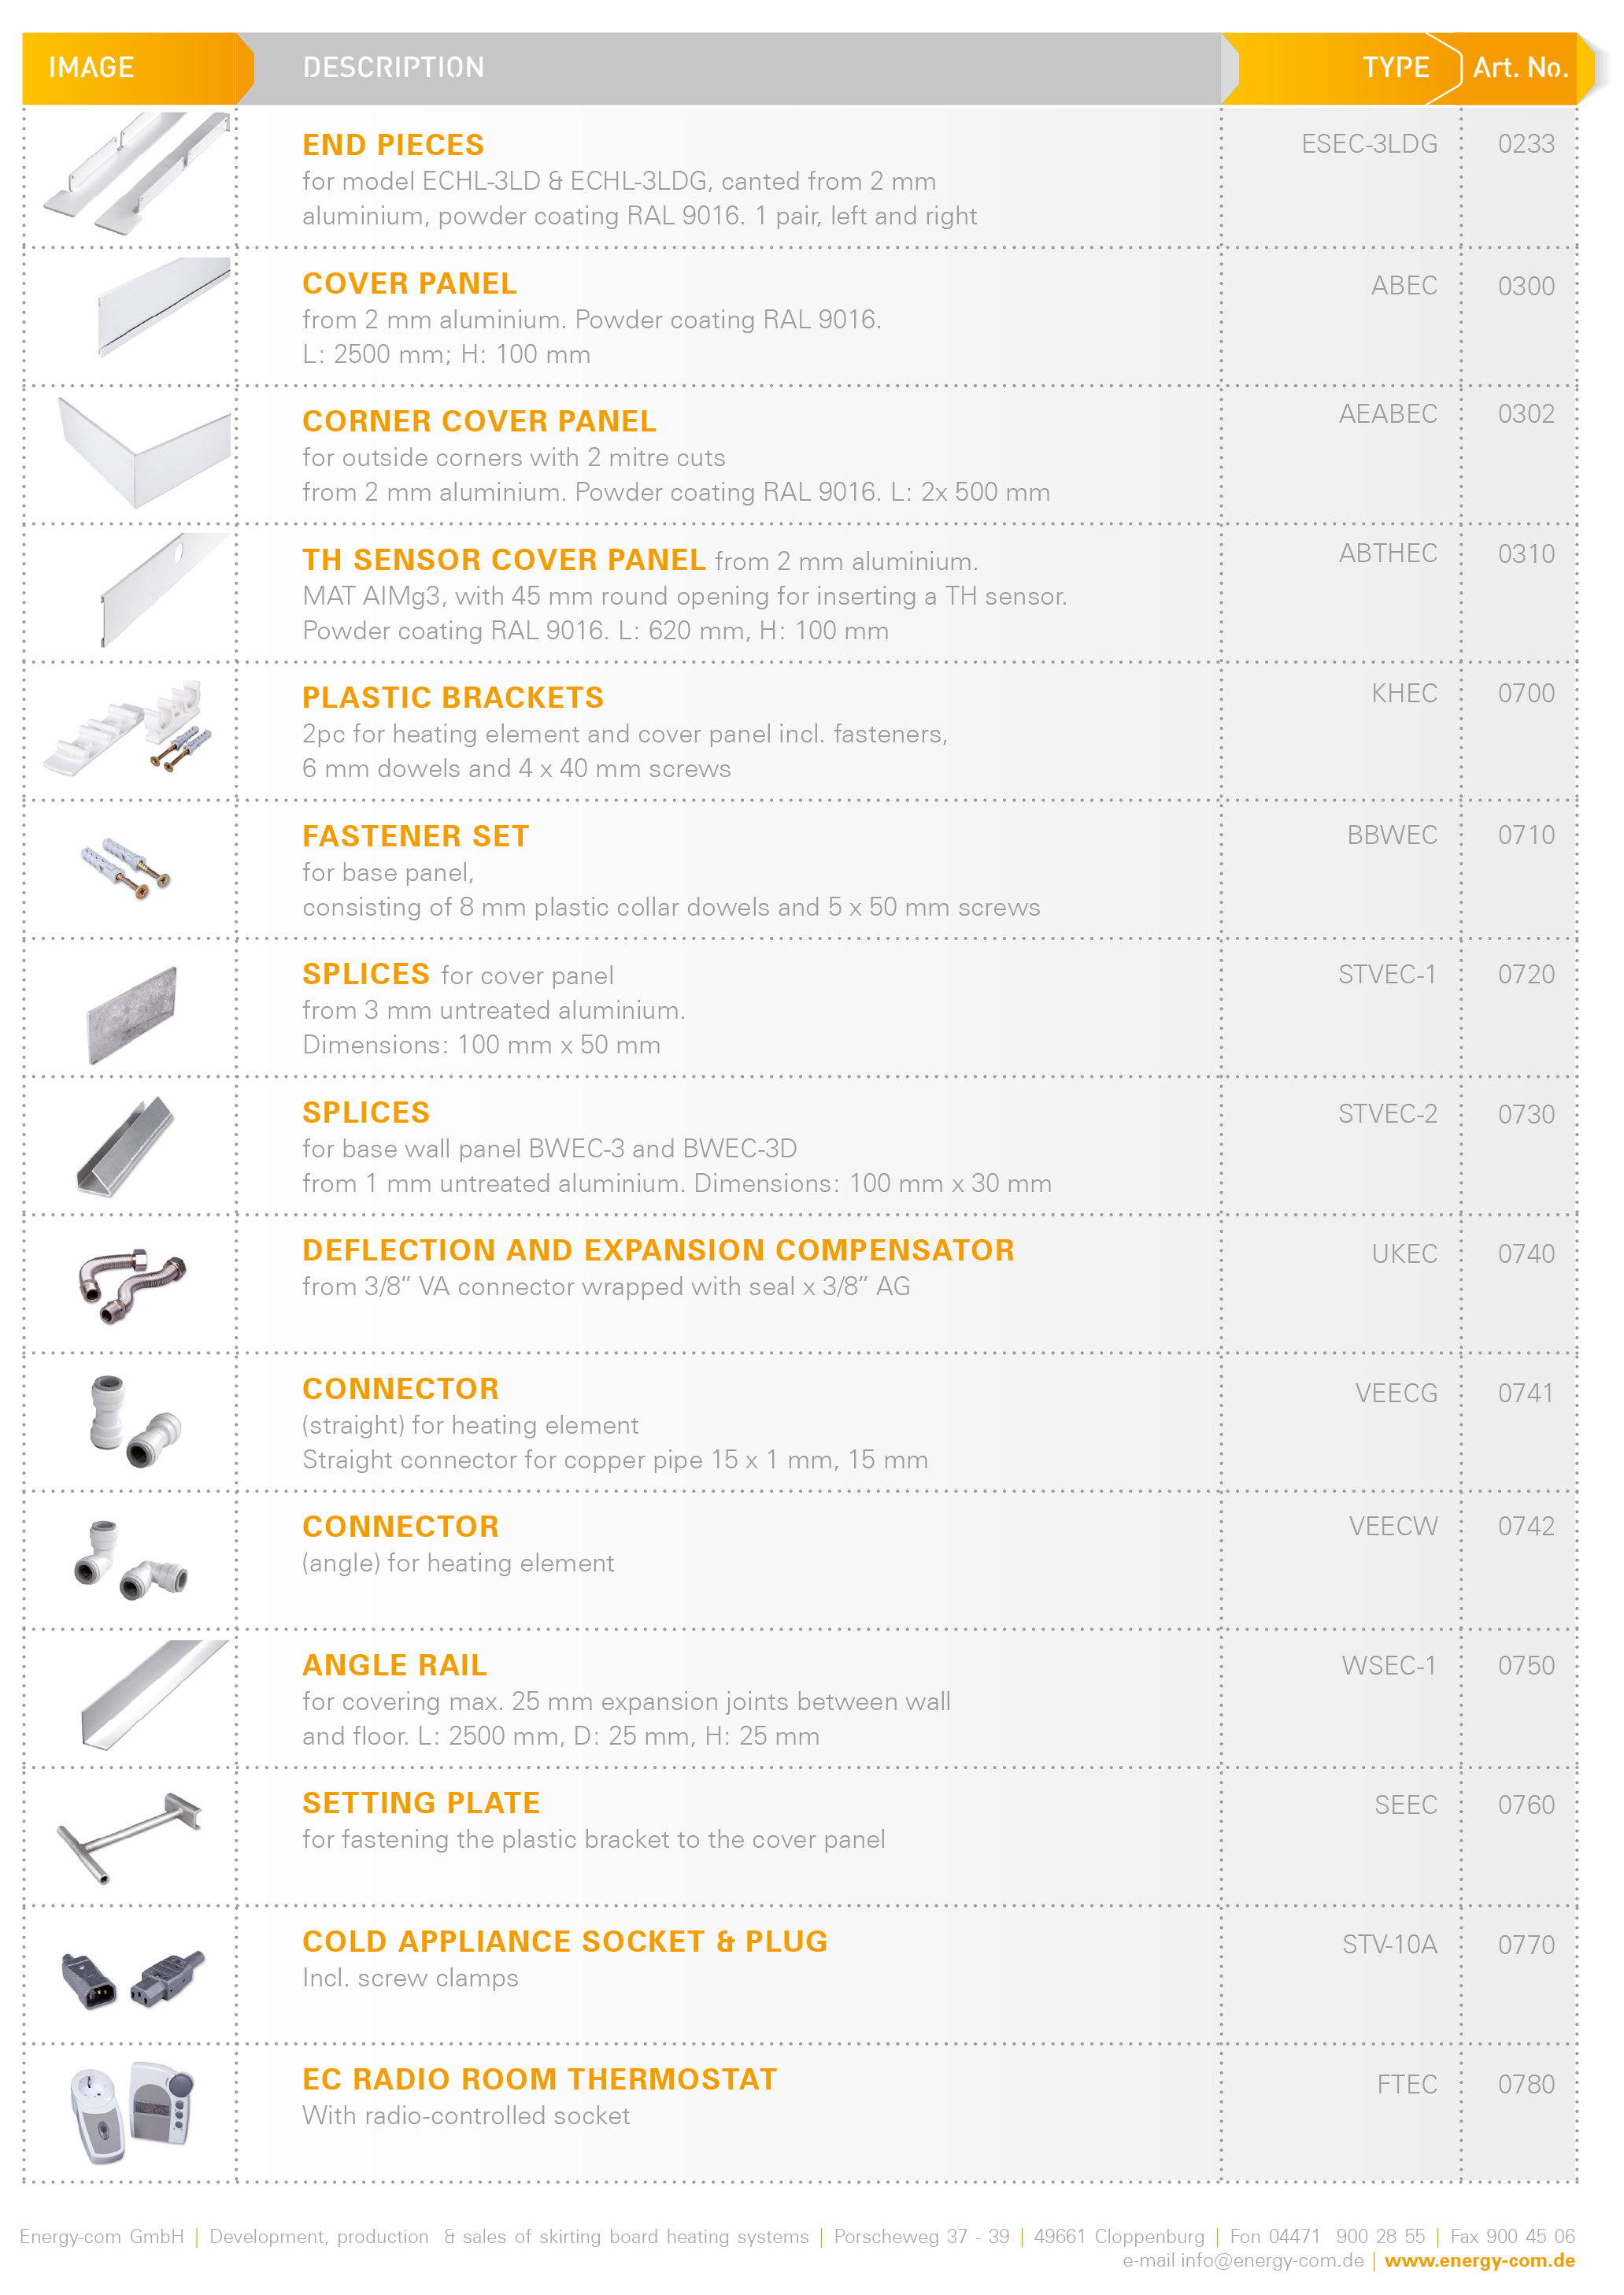 Another picture of the accessories list